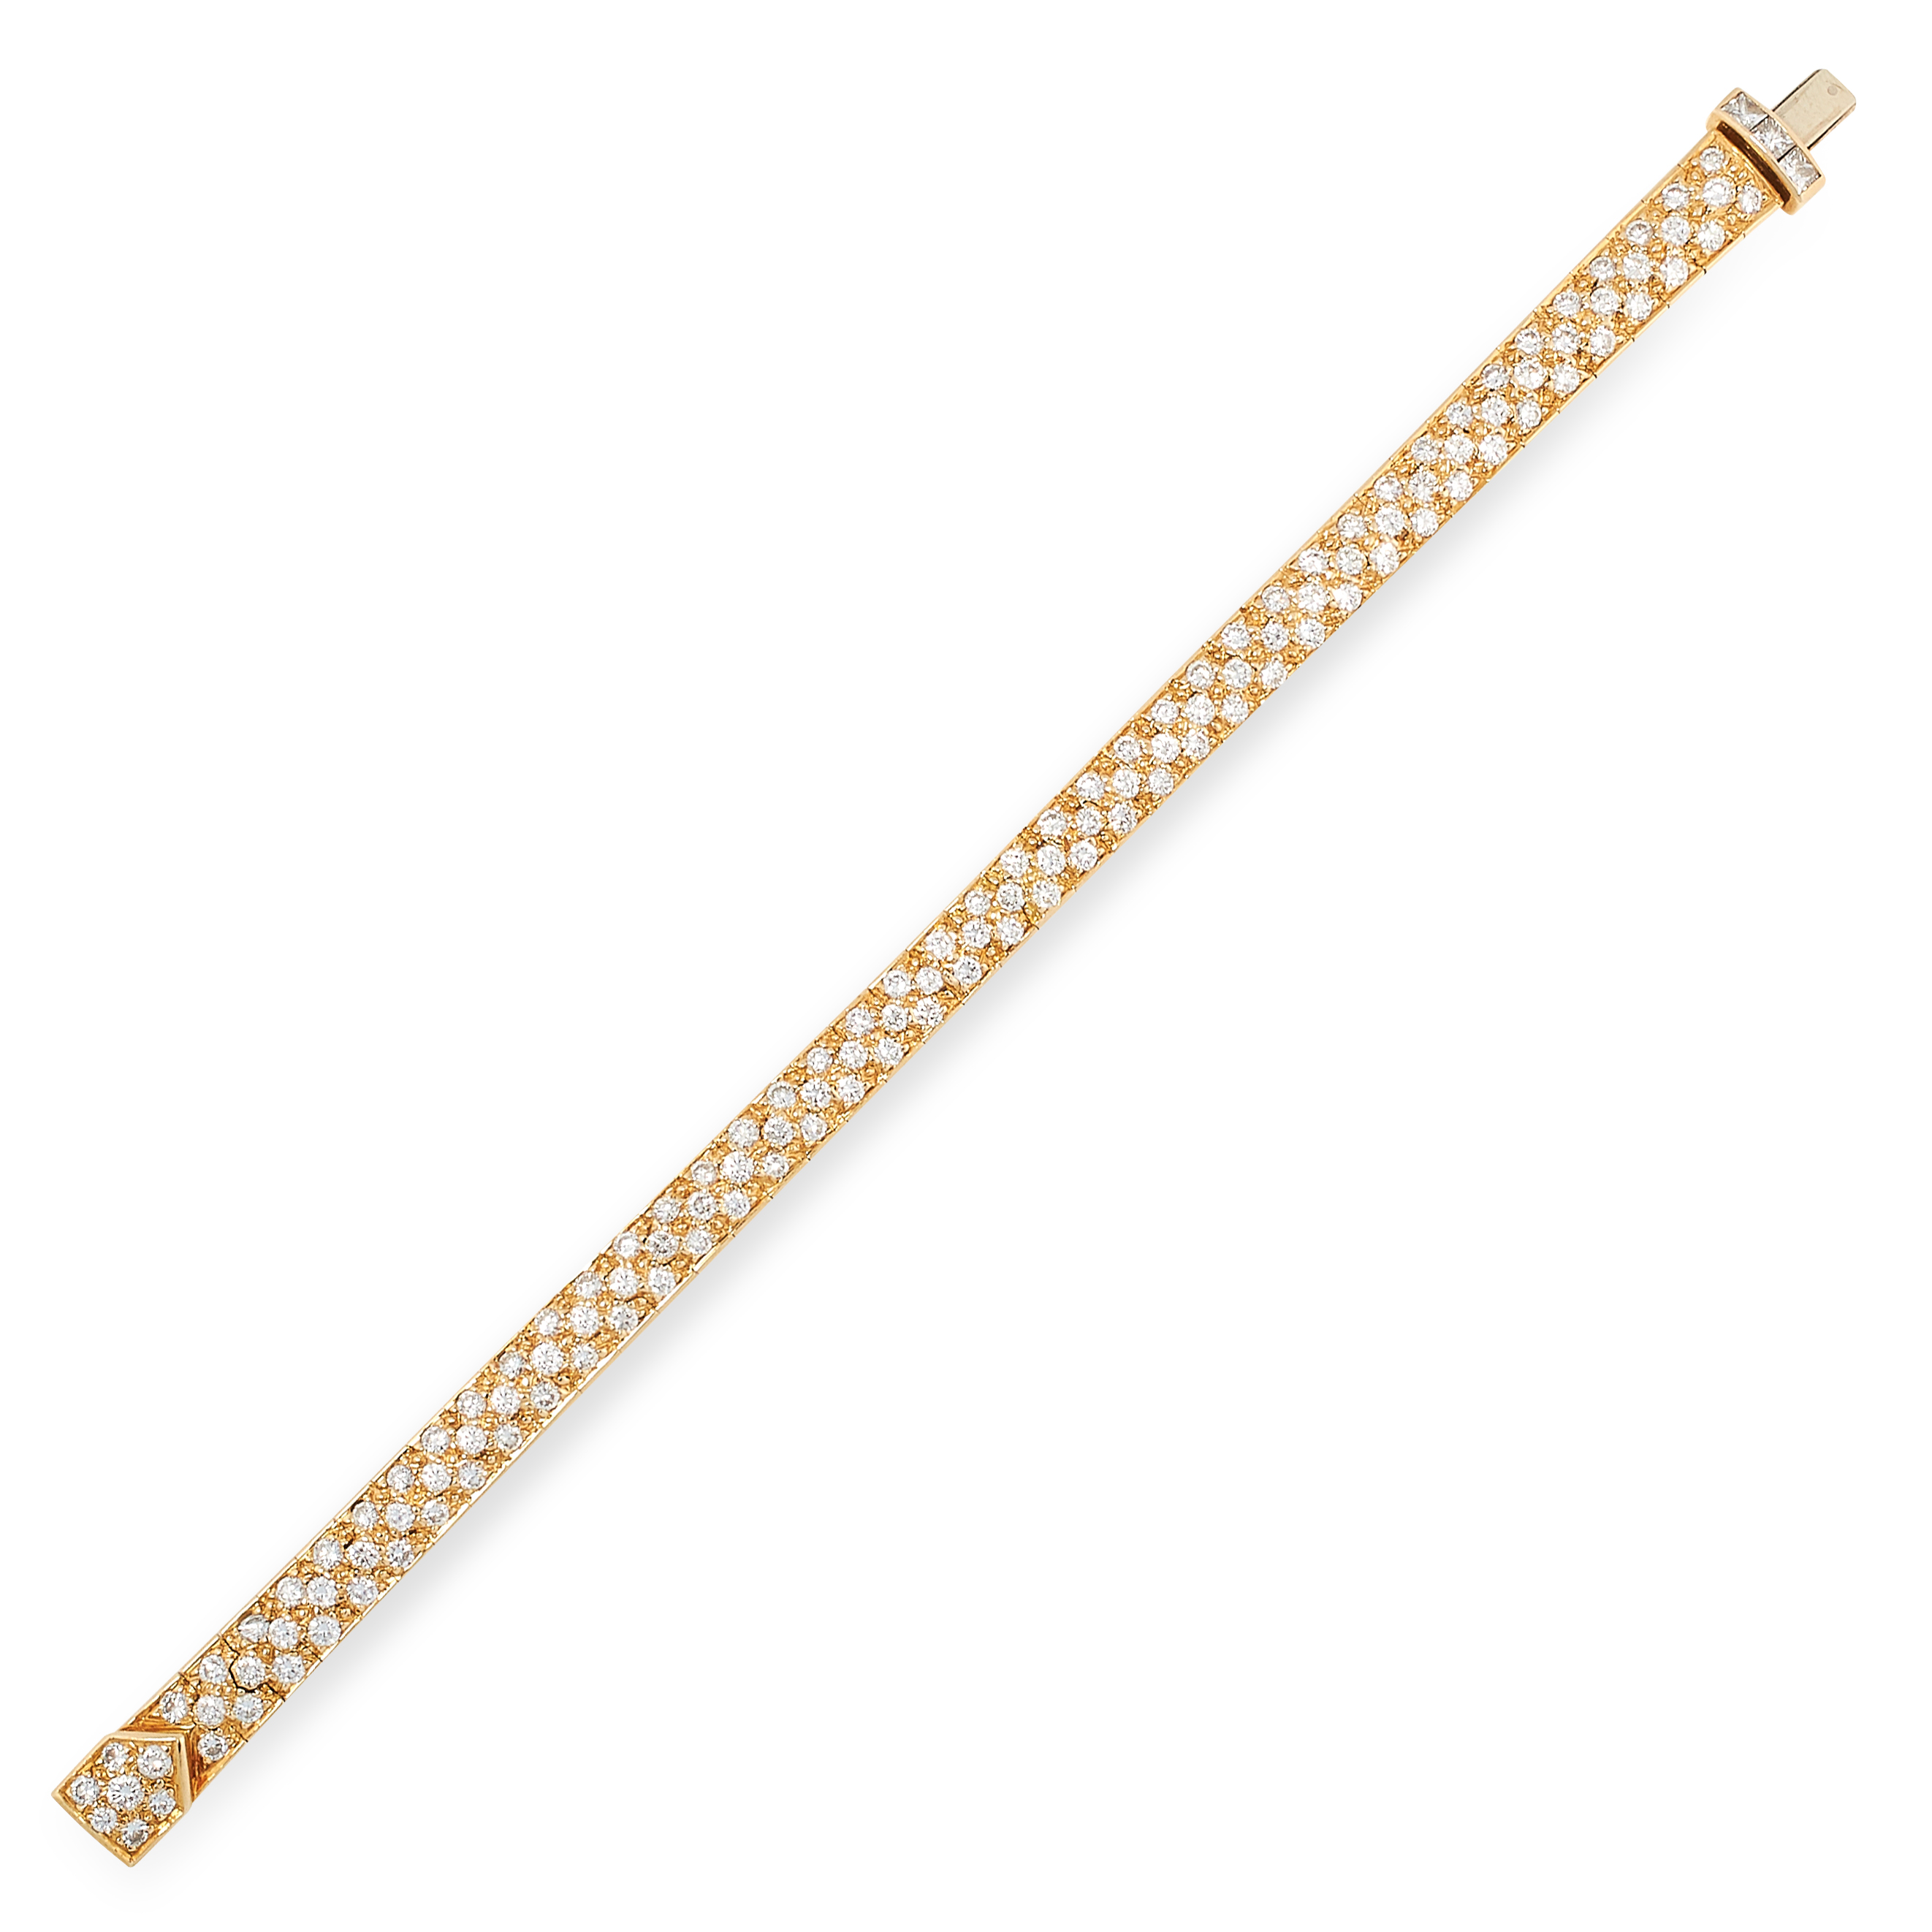 4.00 CARAT DIAMOND BRACELET set with round cut diamonds totalling approximately 4.00 carats, in